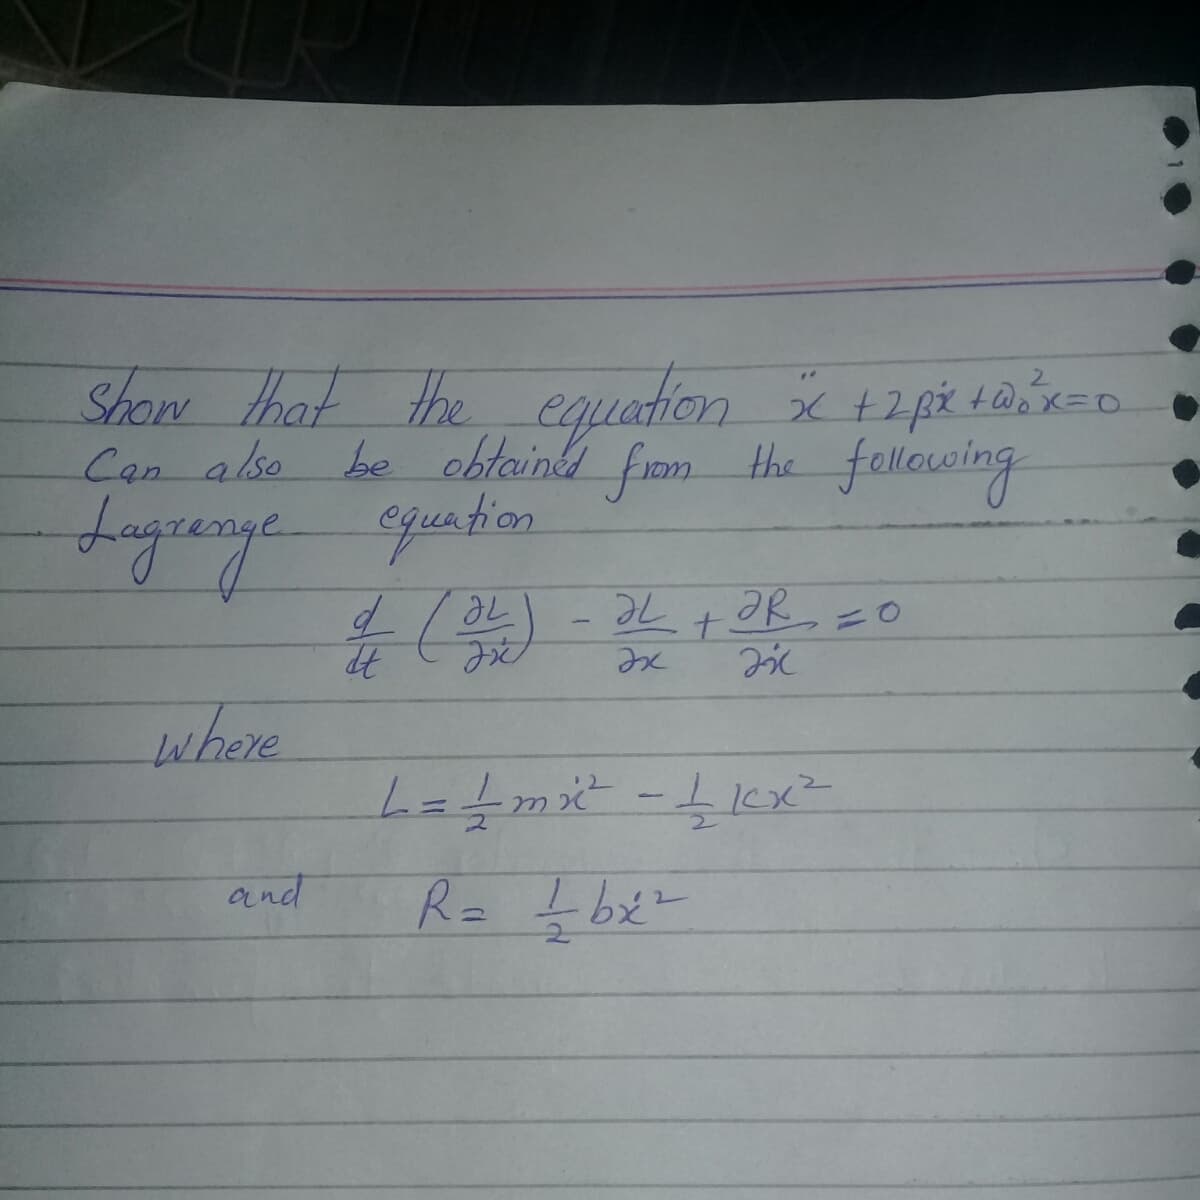 Show that the equadion +2pi taie.
Can also be obtaindd from the fellowing
quation
t.
where
and
R=
